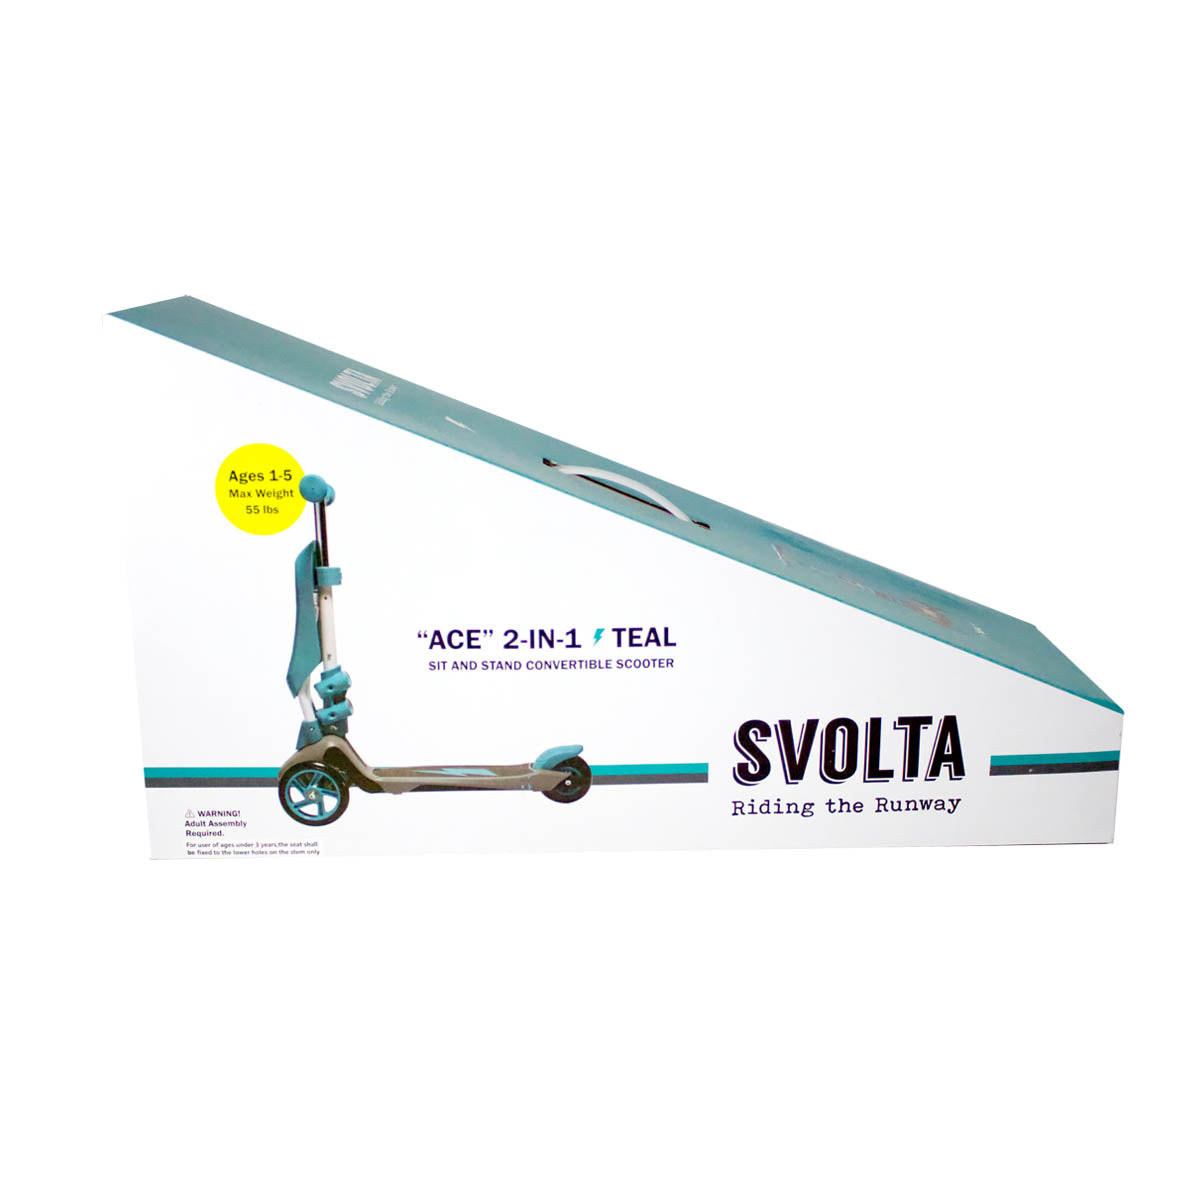 SVOLTA "Ace" and Convertible Scooter - Teal